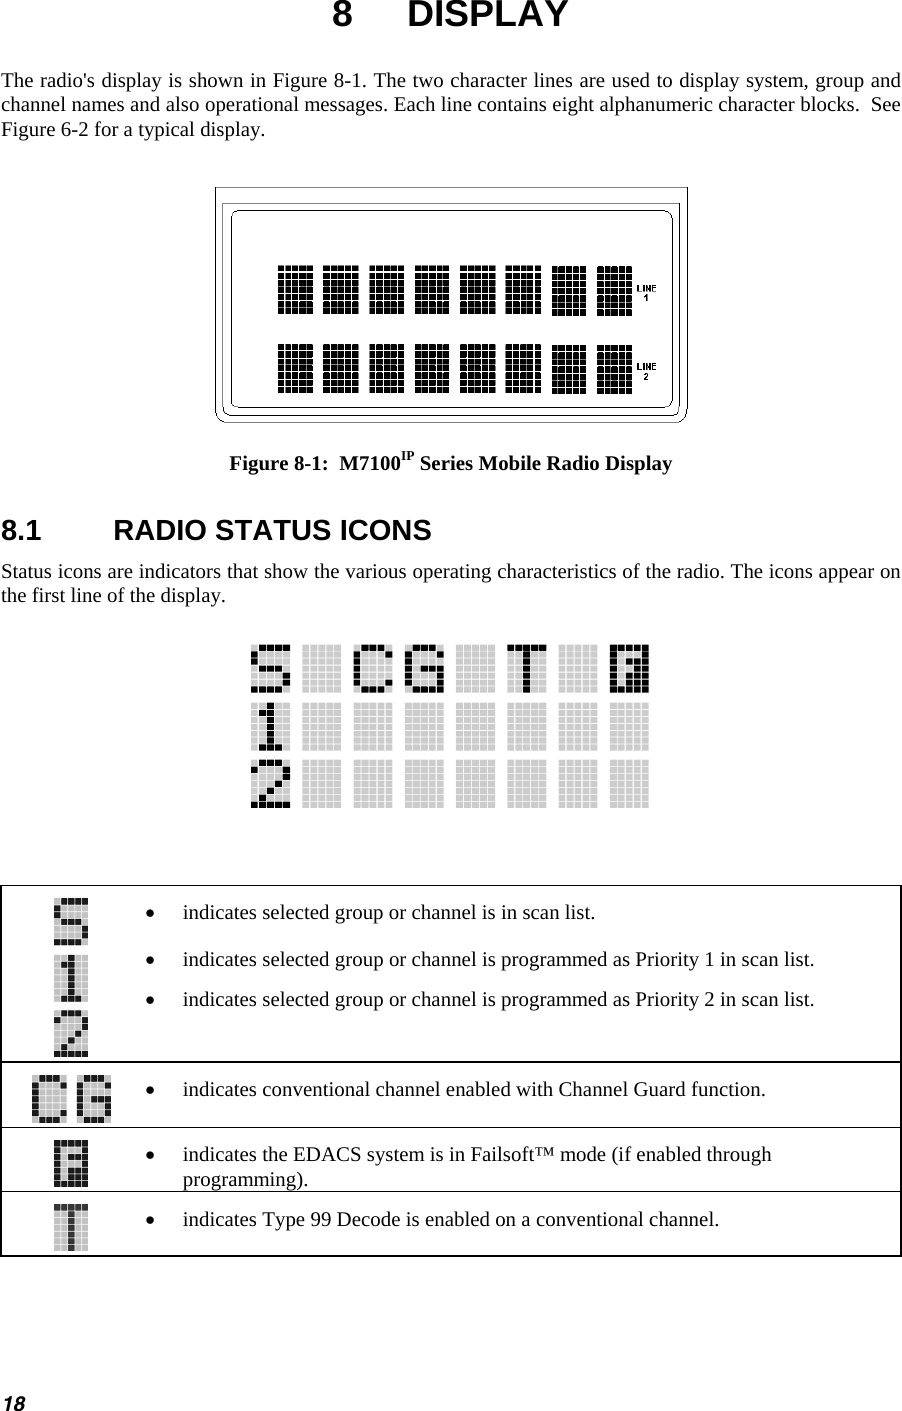  8 DISPLAY The radio&apos;s display is shown in Figure 8-1. The two character lines are used to display system, group and channel names and also operational messages. Each line contains eight alphanumeric character blocks.  See Figure 6-2 for a typical display.   Figure 8-1:  M7100IP Series Mobile Radio Display 8.1  RADIO STATUS ICONS Status icons are indicators that show the various operating characteristics of the radio. The icons appear on the first line of the display.     •  indicates selected group or channel is in scan list. •  indicates selected group or channel is programmed as Priority 1 in scan list. •  indicates selected group or channel is programmed as Priority 2 in scan list.   •  indicates conventional channel enabled with Channel Guard function.   •  indicates the EDACS system is in Failsoft™ mode (if enabled through programming).   •  indicates Type 99 Decode is enabled on a conventional channel.  18 